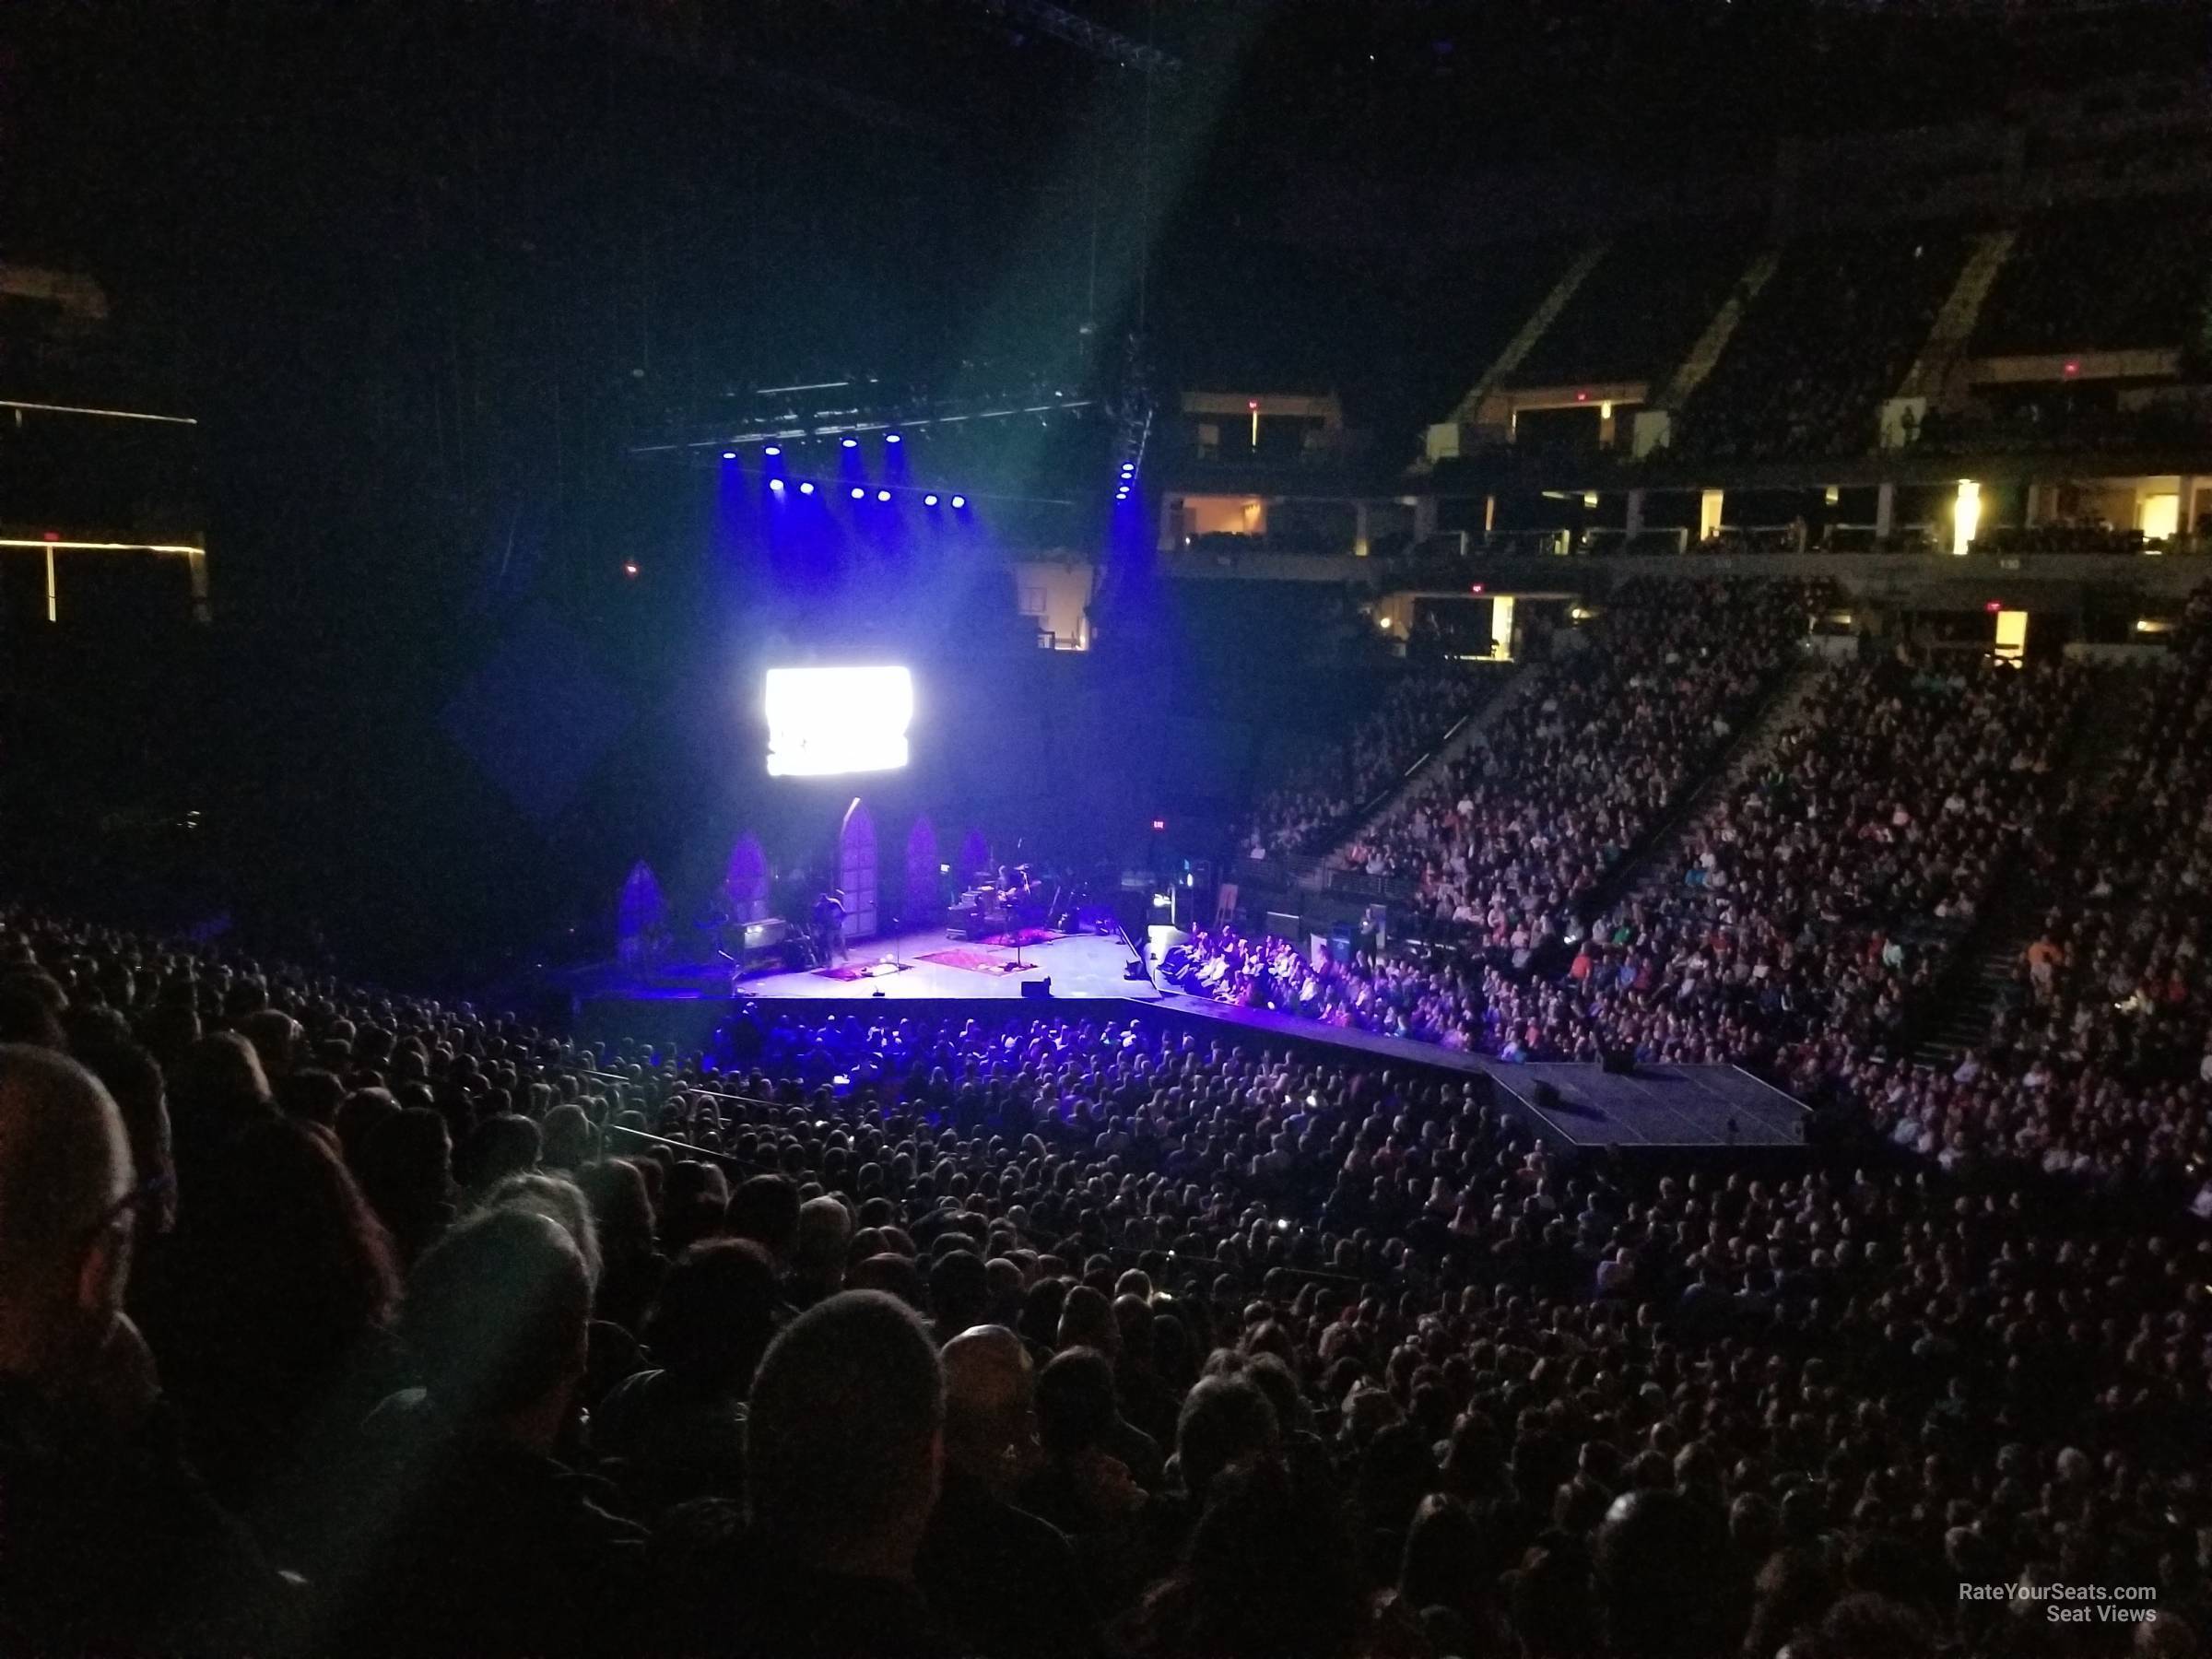 section 111, row u seat view  for concert - target center